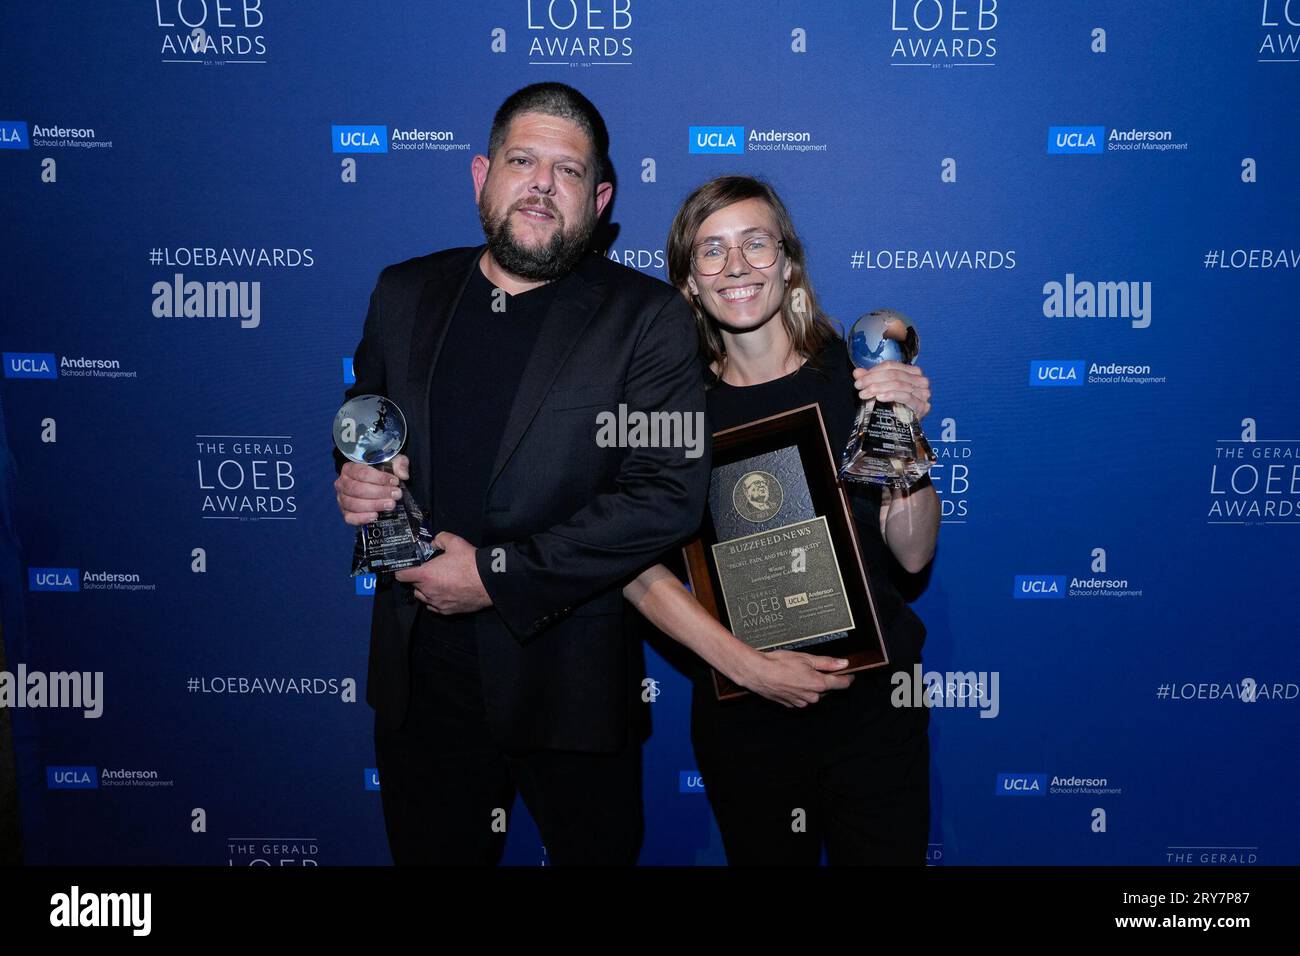 New York, United States. 28th Sep, 2023. New York, New York. Thursday September 28, 2023. Kendall Taggart, Anthony Cormier during 2023 Gerald Loeb Awards hosted by UCLA Anderson School of Business, held at Capitale in New York City, Thursday, September 28, 2023. Photo Credit: Jennifer Graylock/Alamy Live News Stock Photo